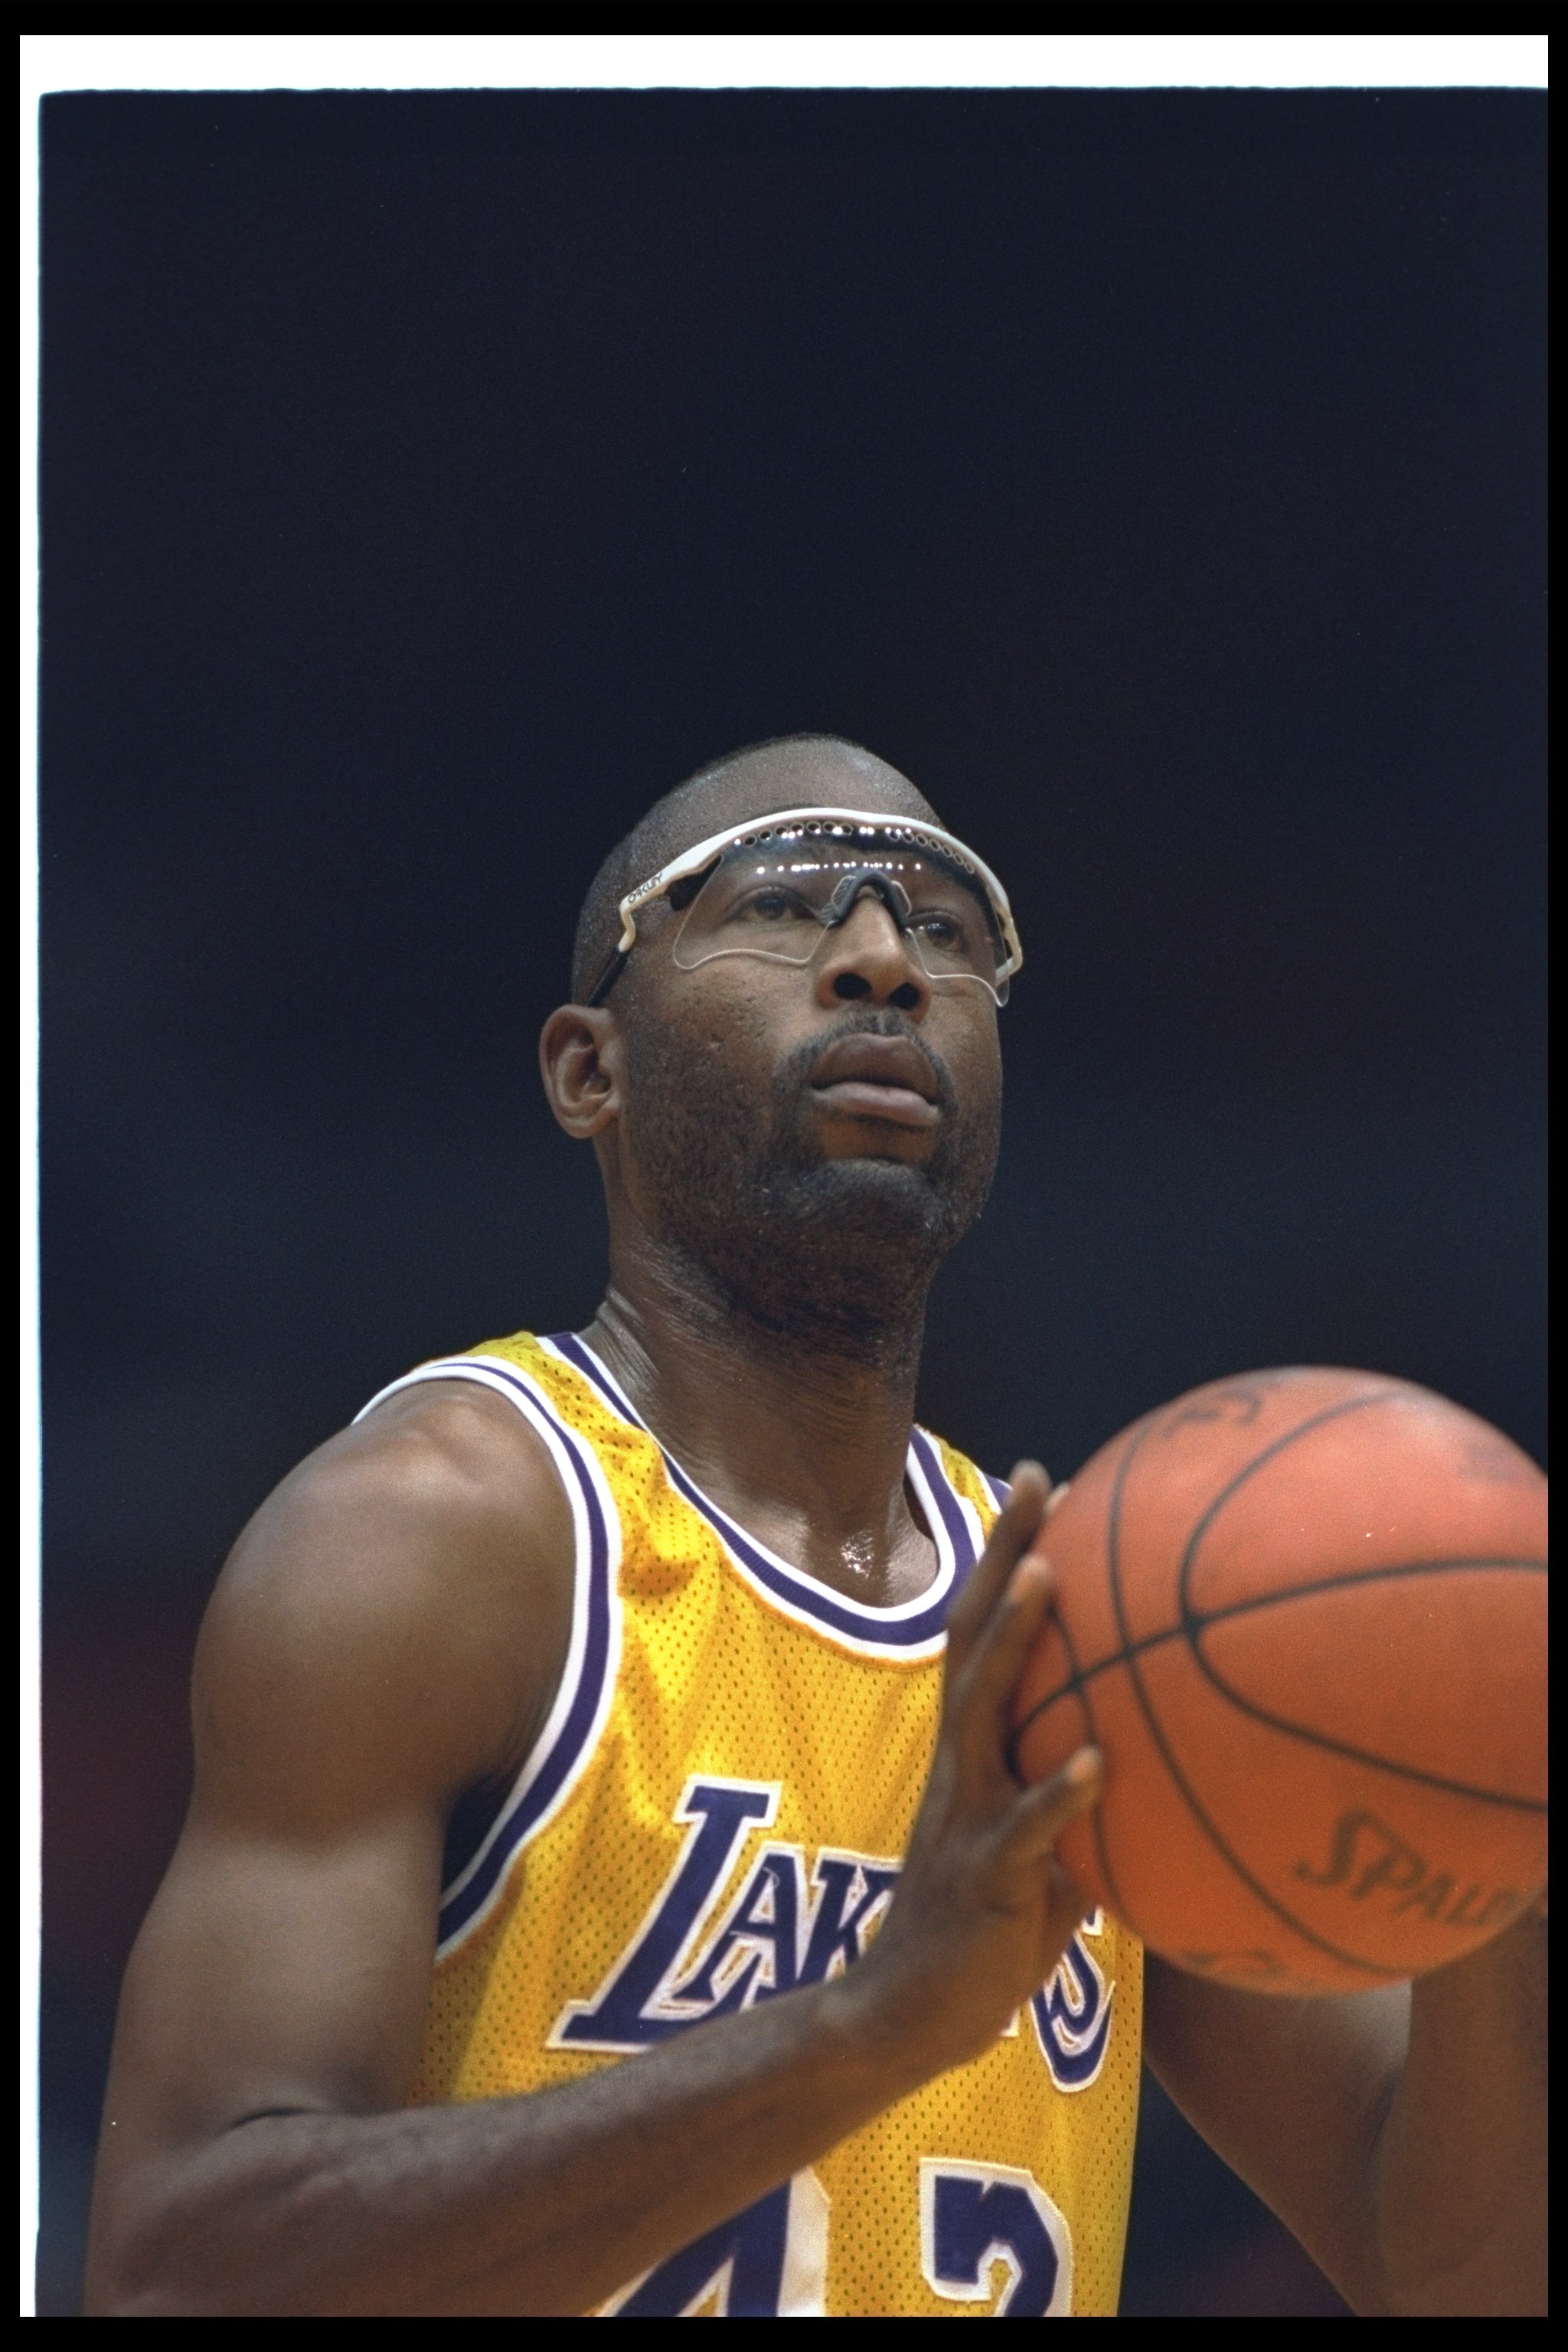 INGLEWOOD, CA - DECEMBER 5:  Forward James Worthy #42 of the Los Angeles Lakers prepares to shoot the free throw during an NBA game against the Minnesota Timberwolves on December 5, 1993 at the Great Western Forum in Inglewood, California. The Timberwolve